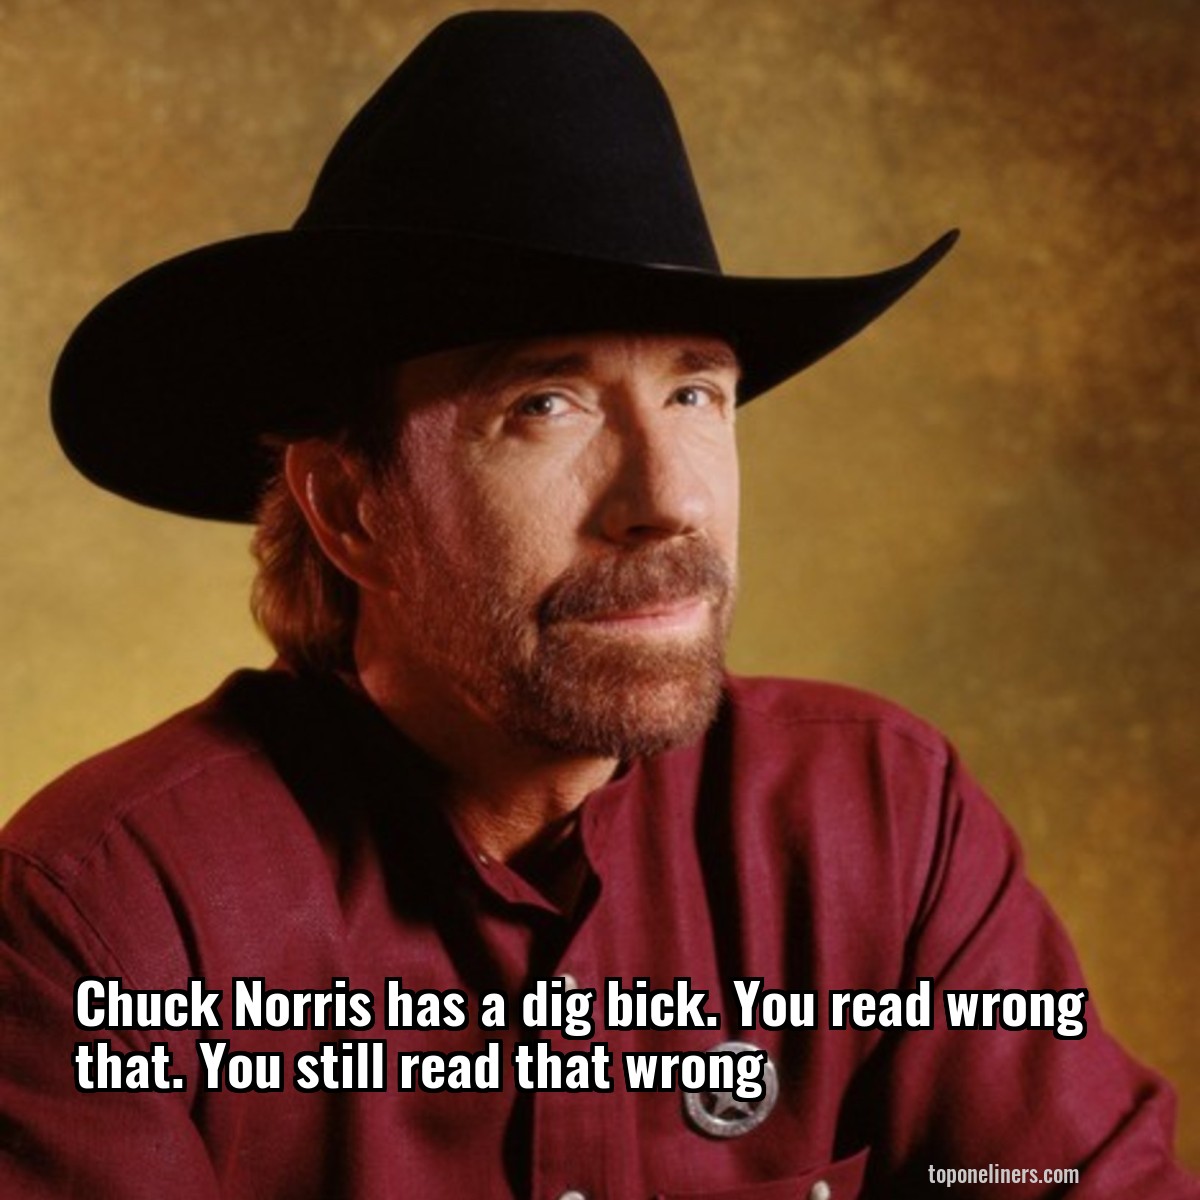 Chuck Norris has a dig bick. You read wrong that. You still read that wrong